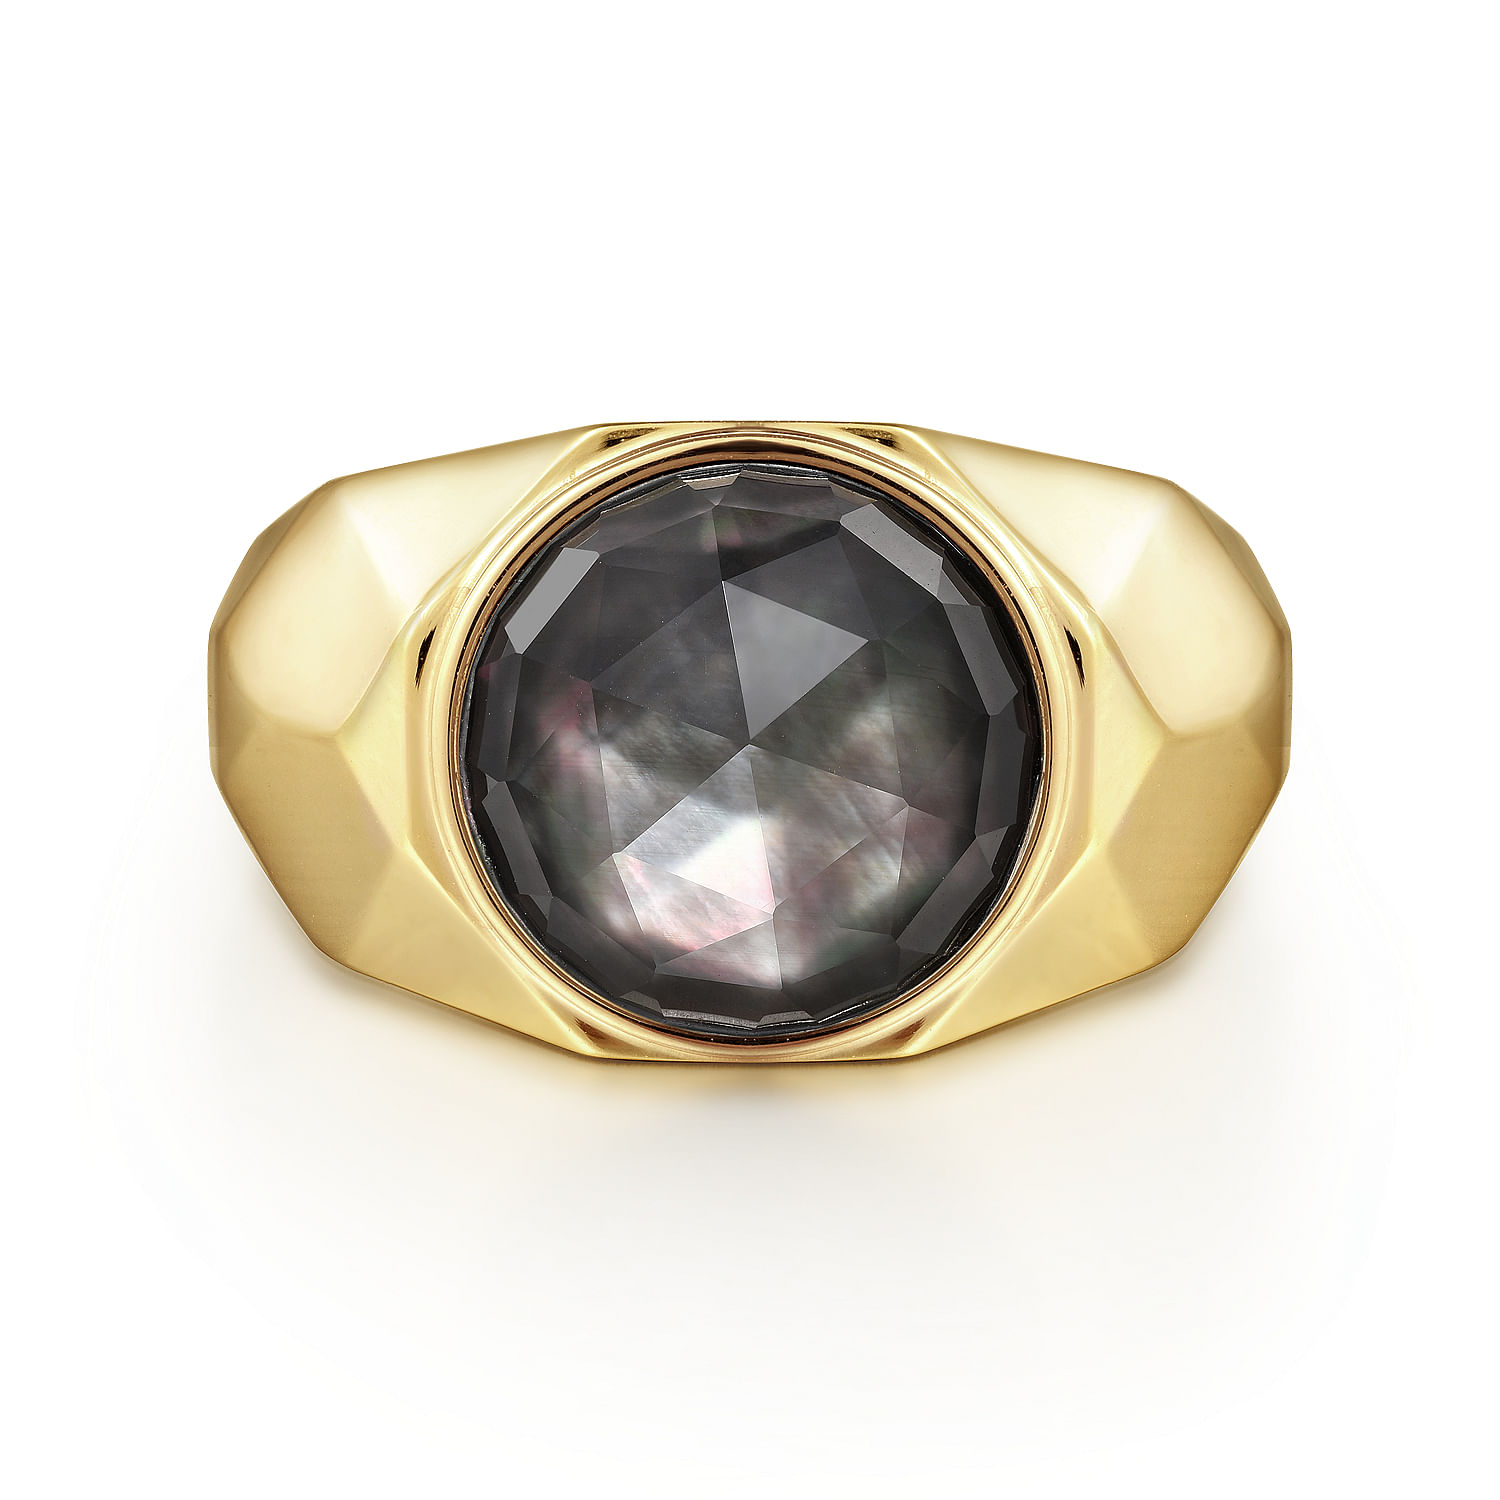 Wide 14K Yellow Gold Signet Ring with Black Mother of Pearl Stone in High Polished Finish